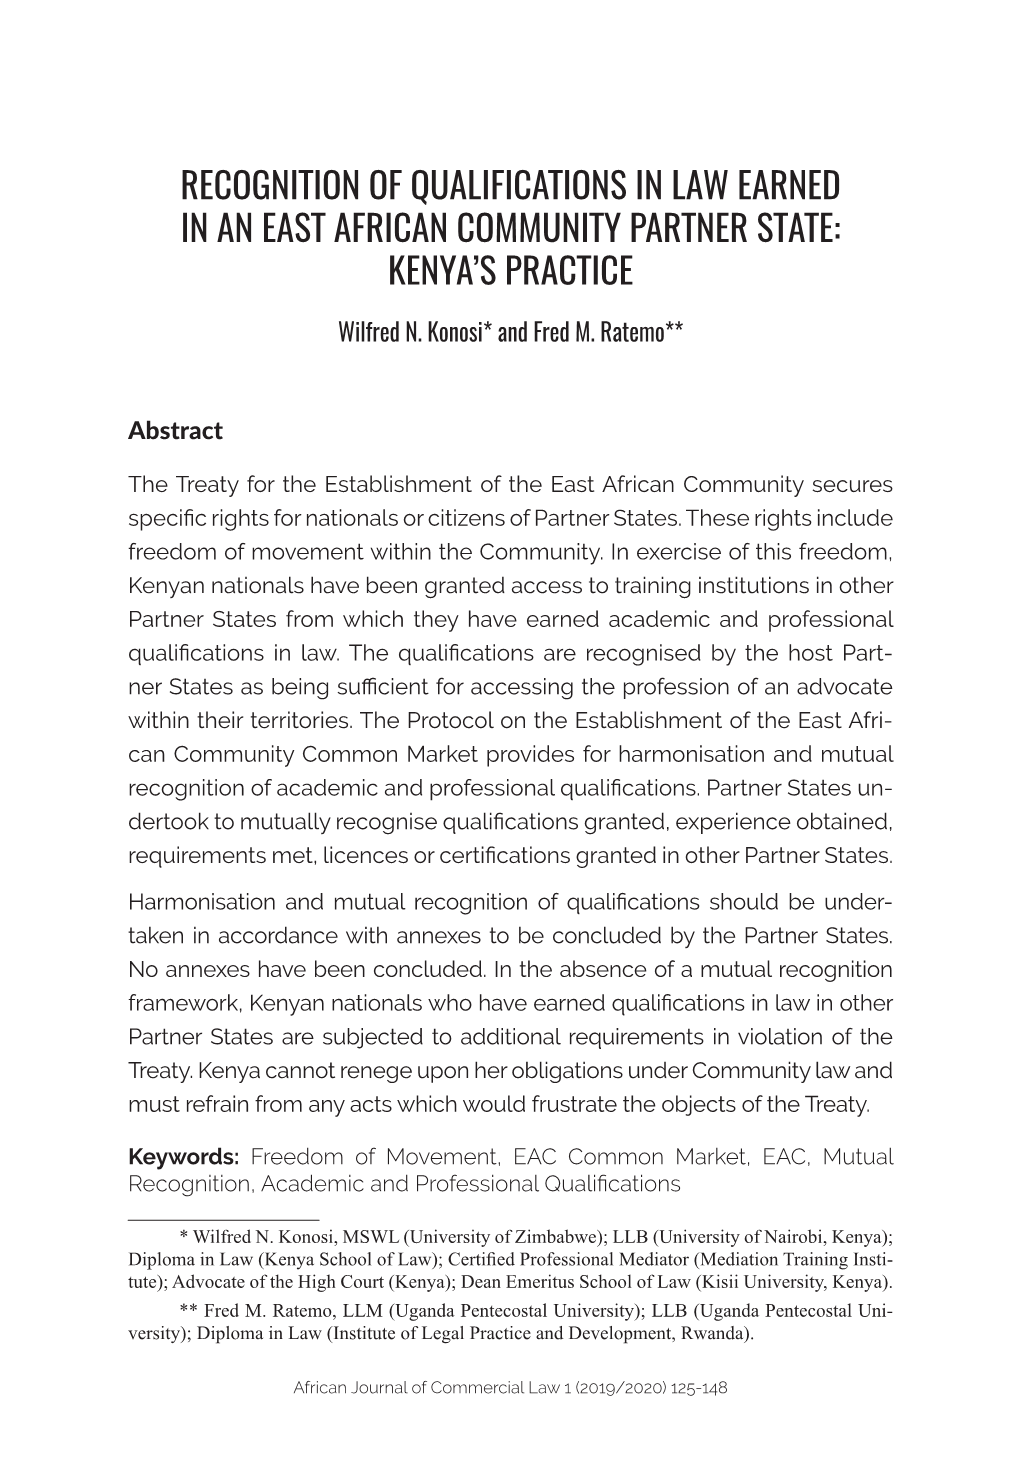 Recognition of Qualifications in Law Earned in an East African Community Partner State: Kenya’S Practice